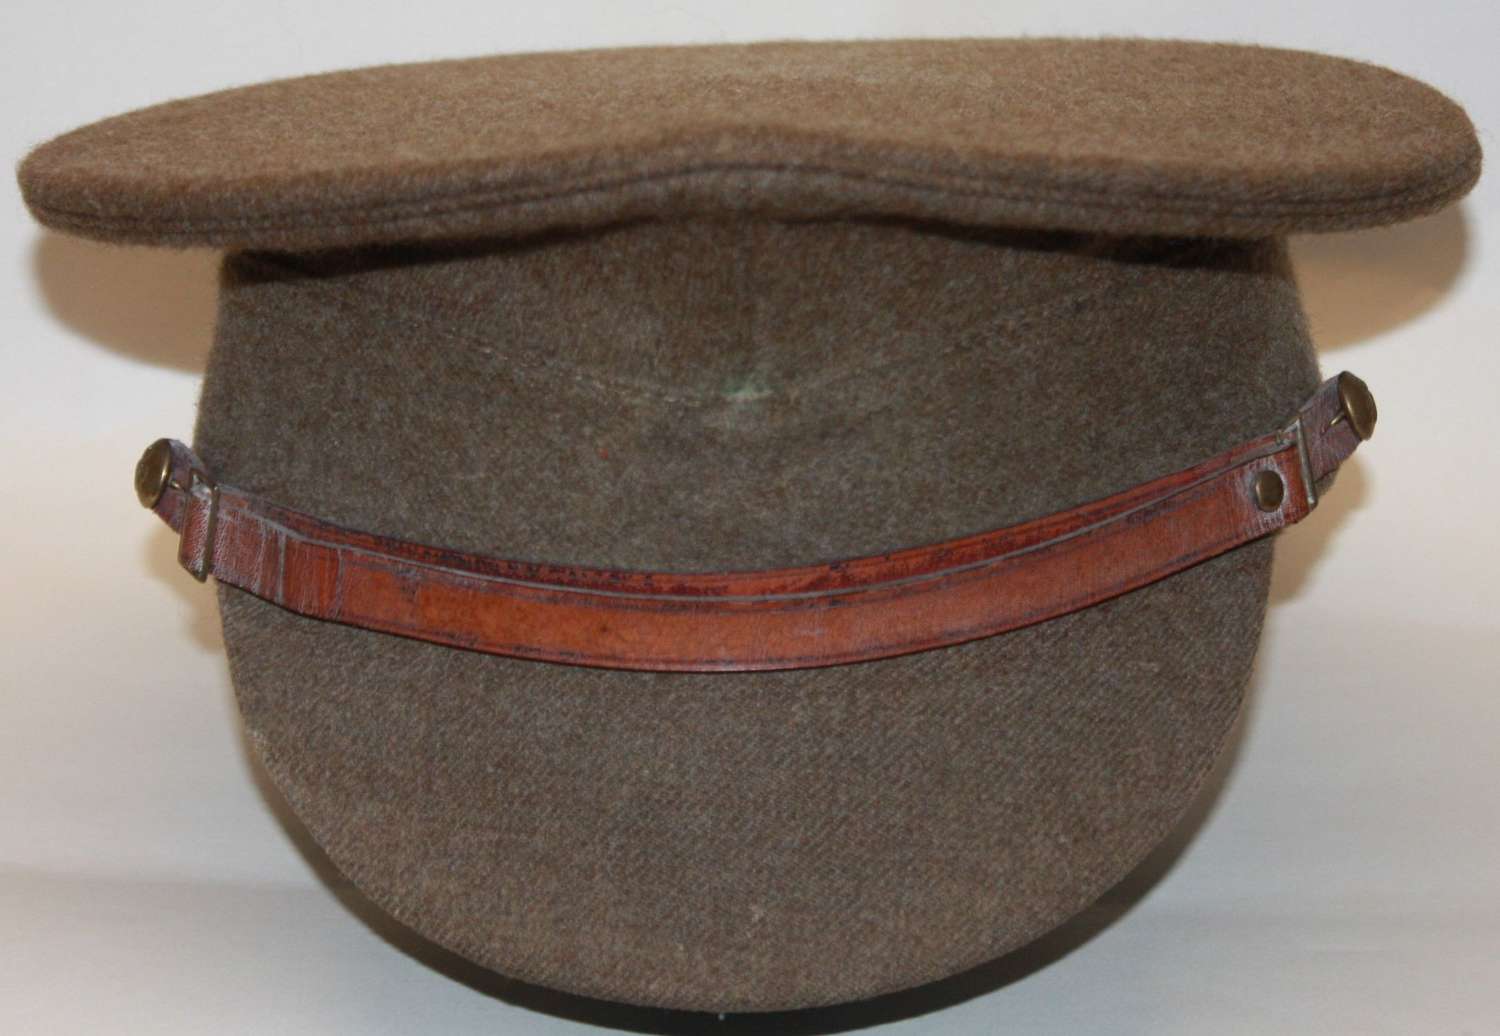 A 1922 pattern British issue peaked cap this a post WWII EXAMPLE